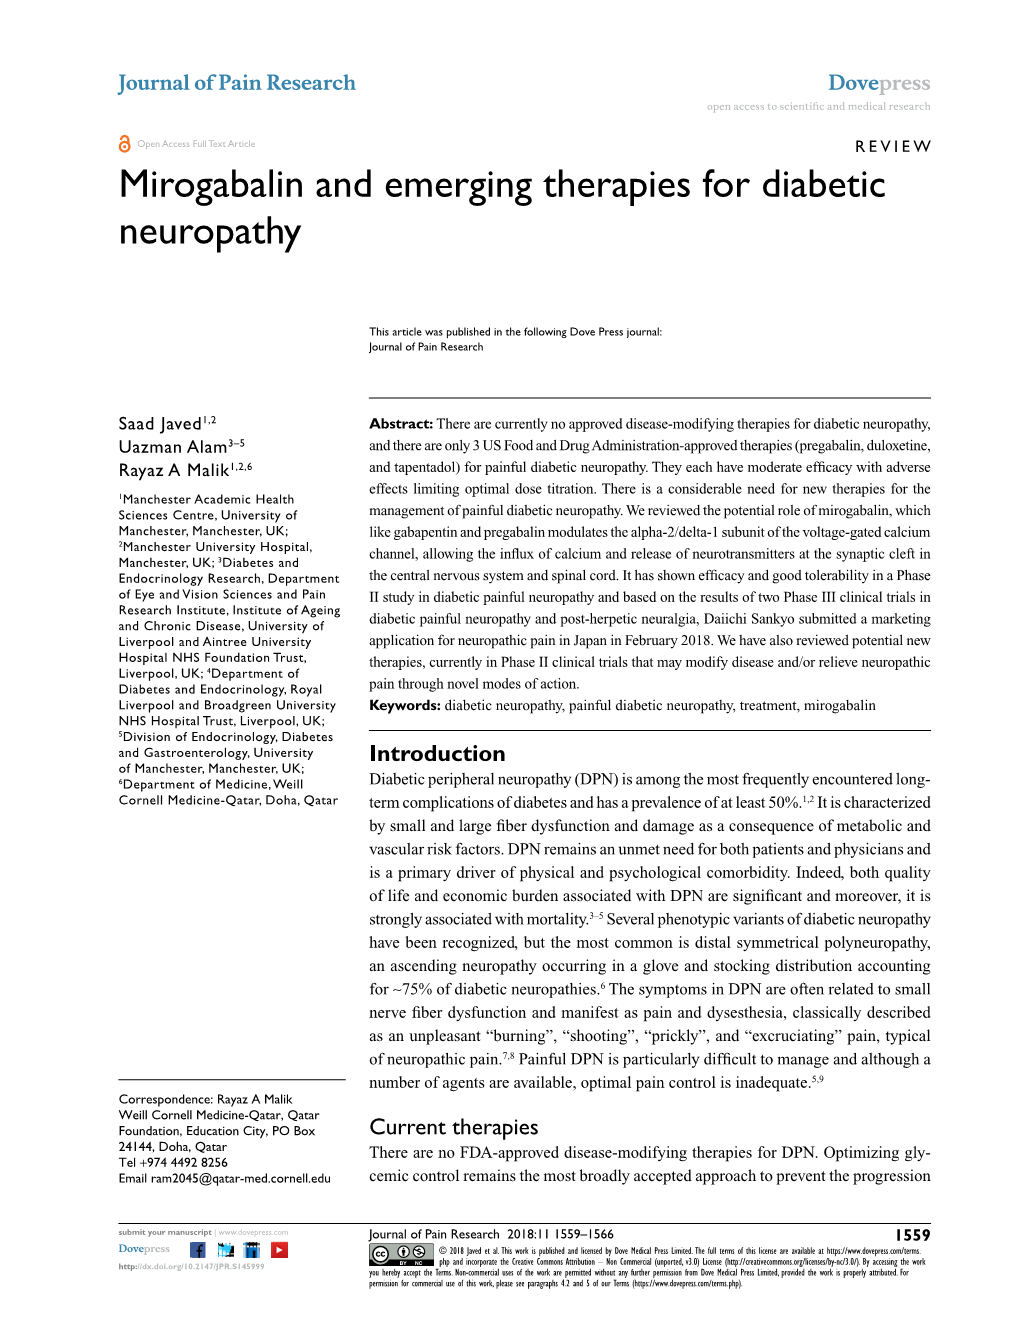 Mirogabalin and Emerging Therapies for Diabetic Neuropathy Open Access to Scientiﬁc and Medical Research DOI